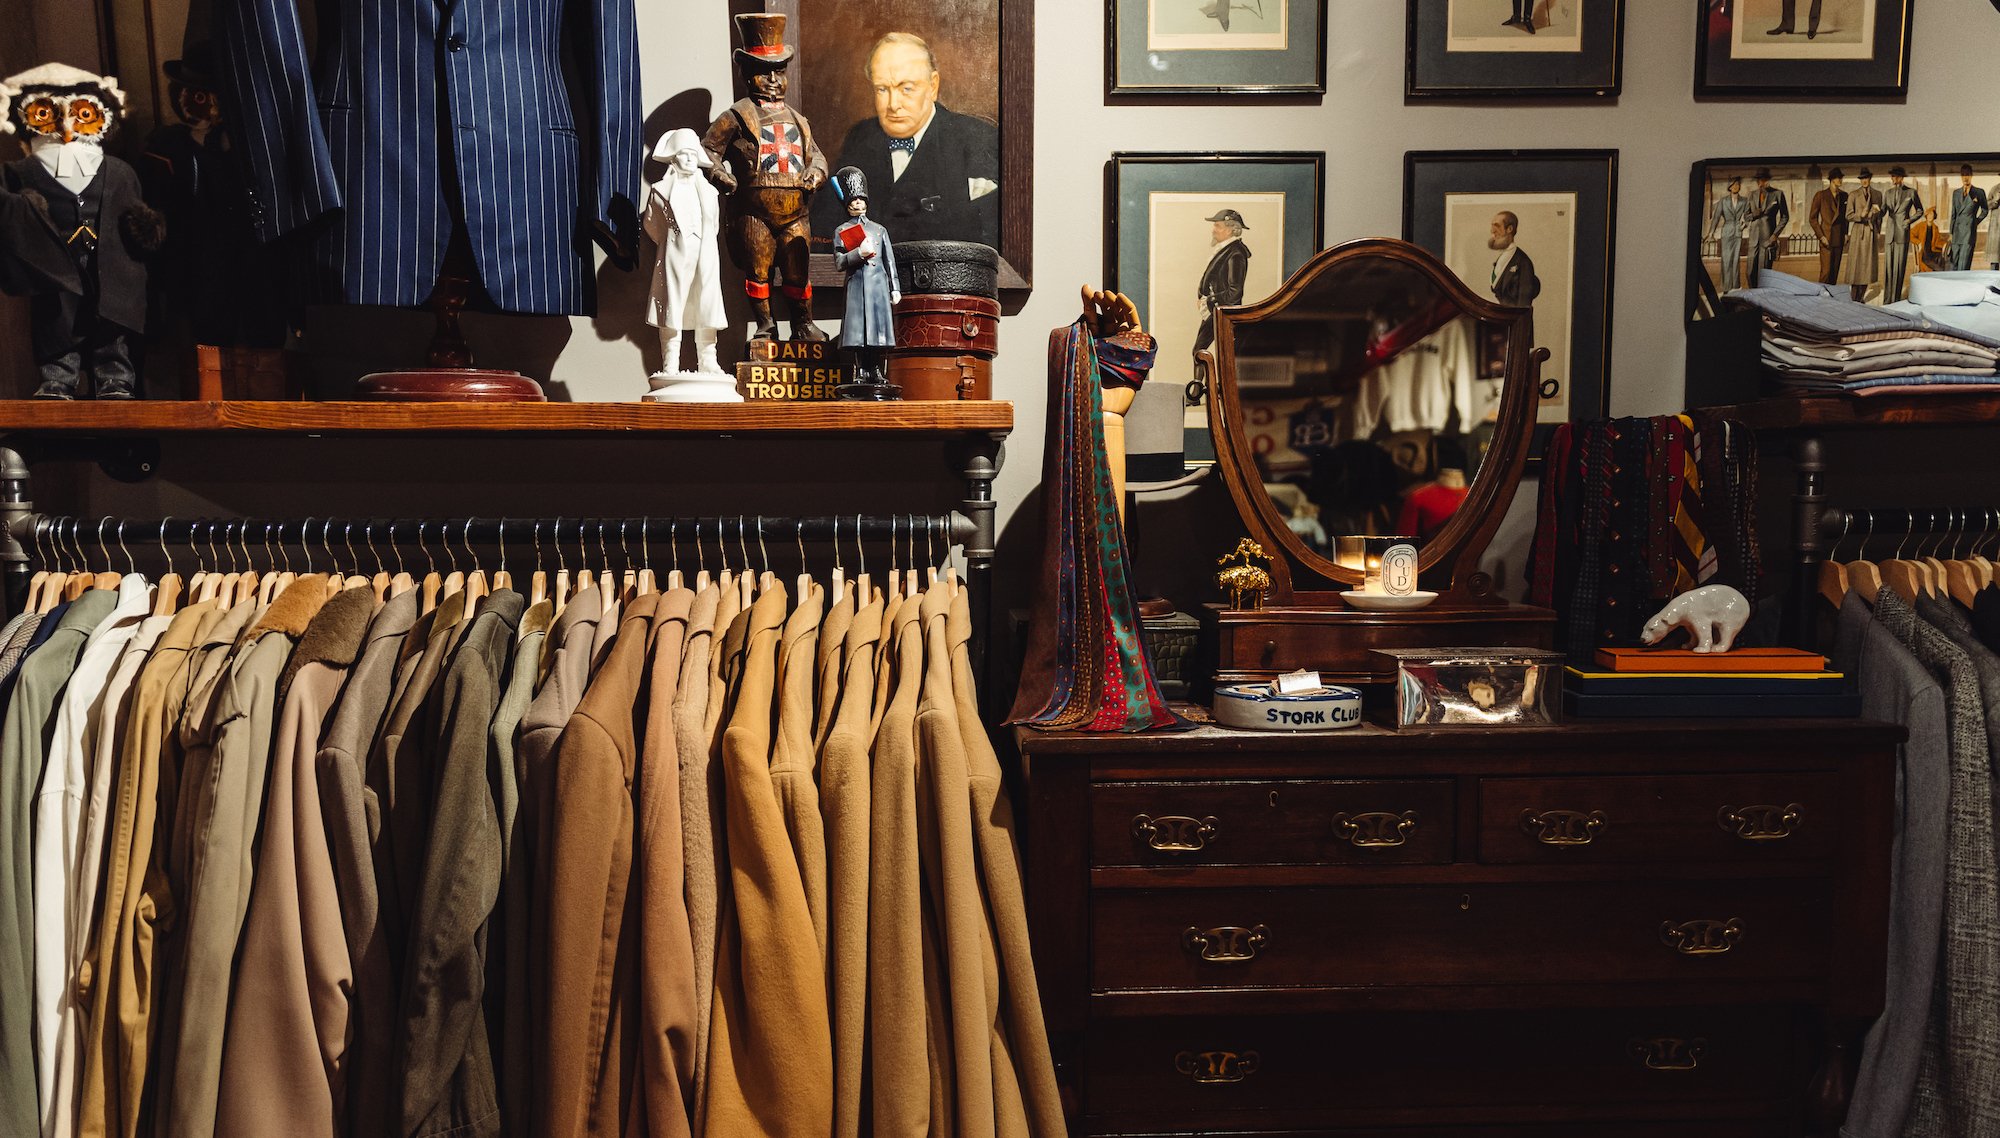 So you want a $500,000 luxury boutique closet?